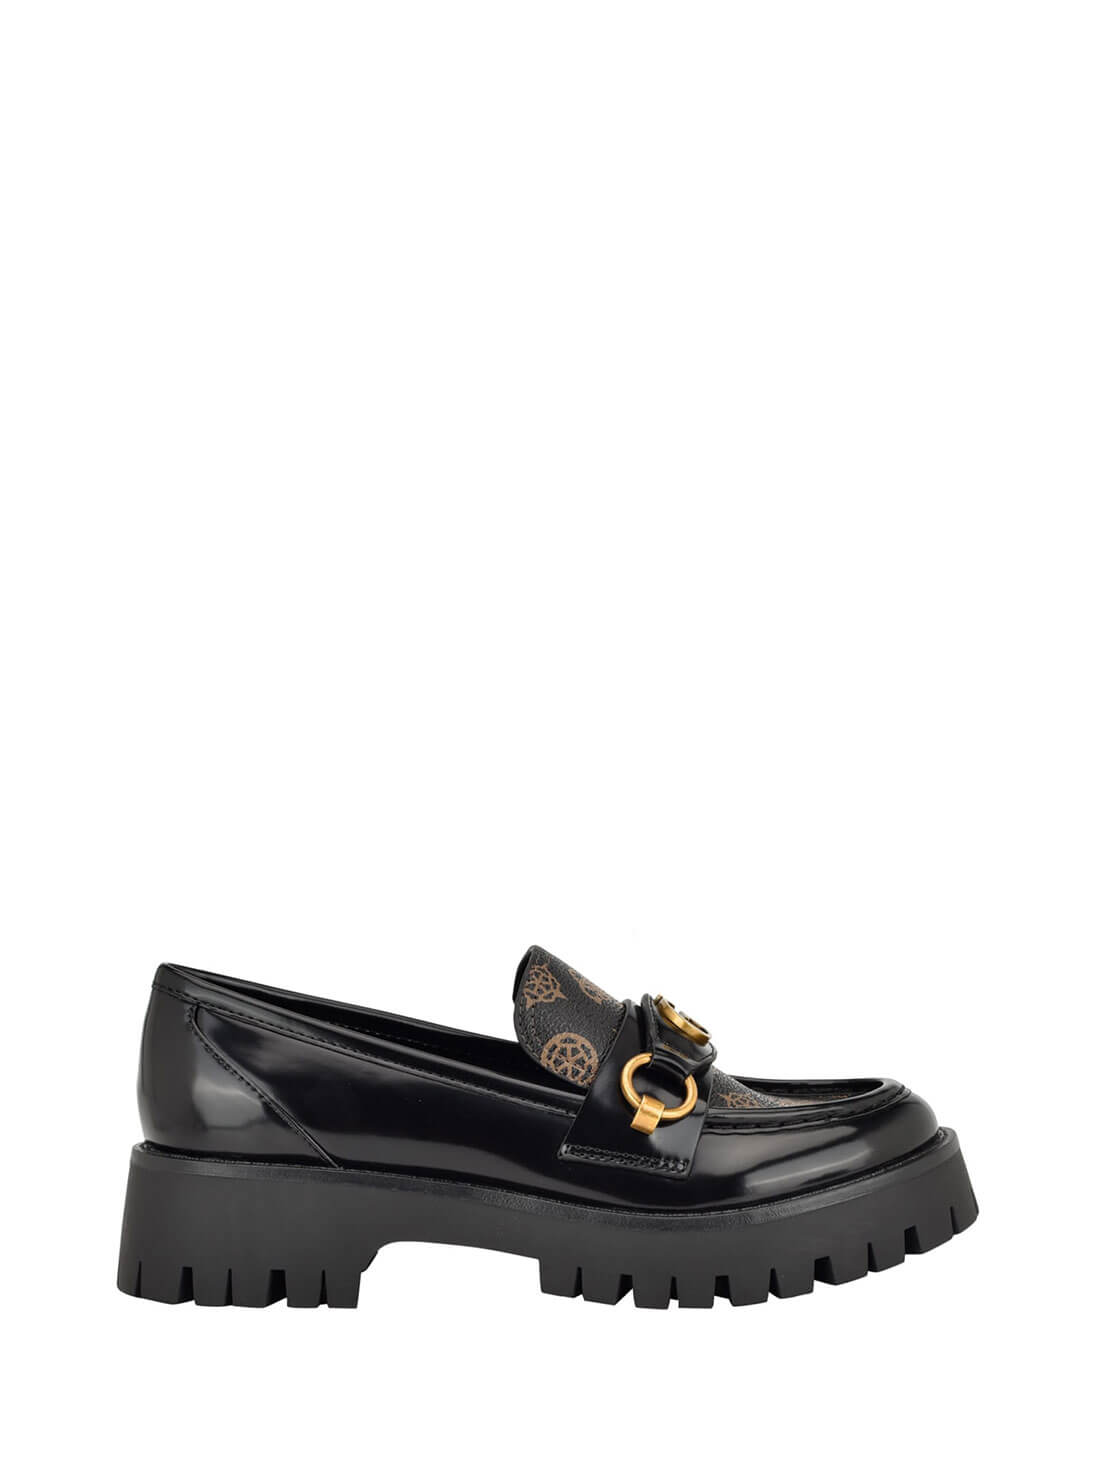 Black Logo Almost Loafers | GUESS Women's Shoes | side view